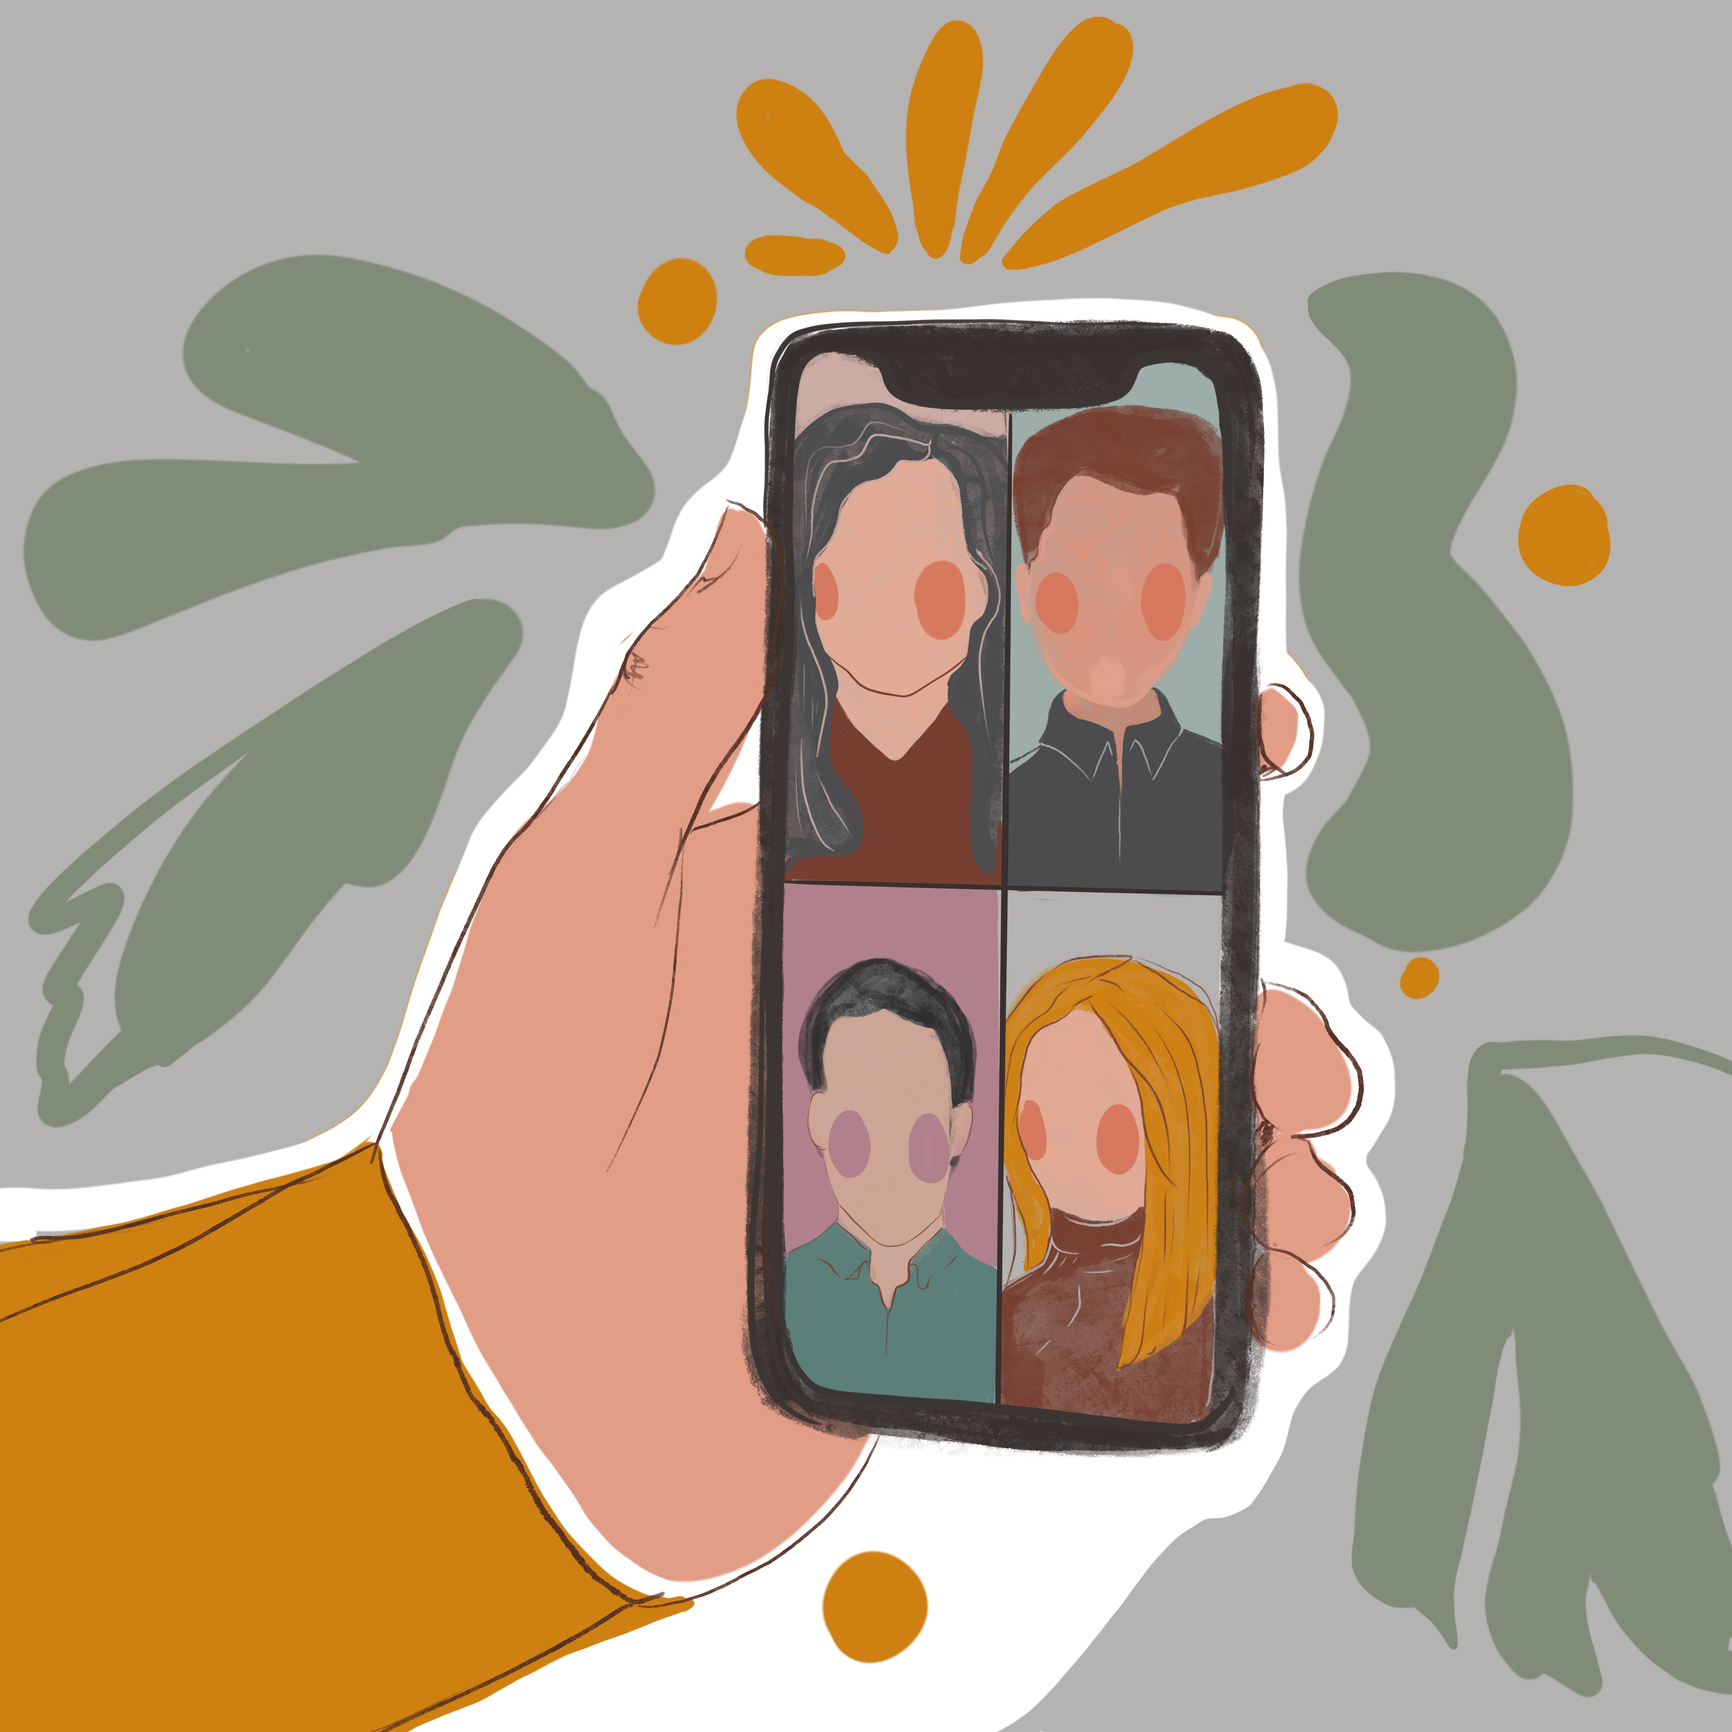 illustration of hand holding mobile phone and using the video chat app.